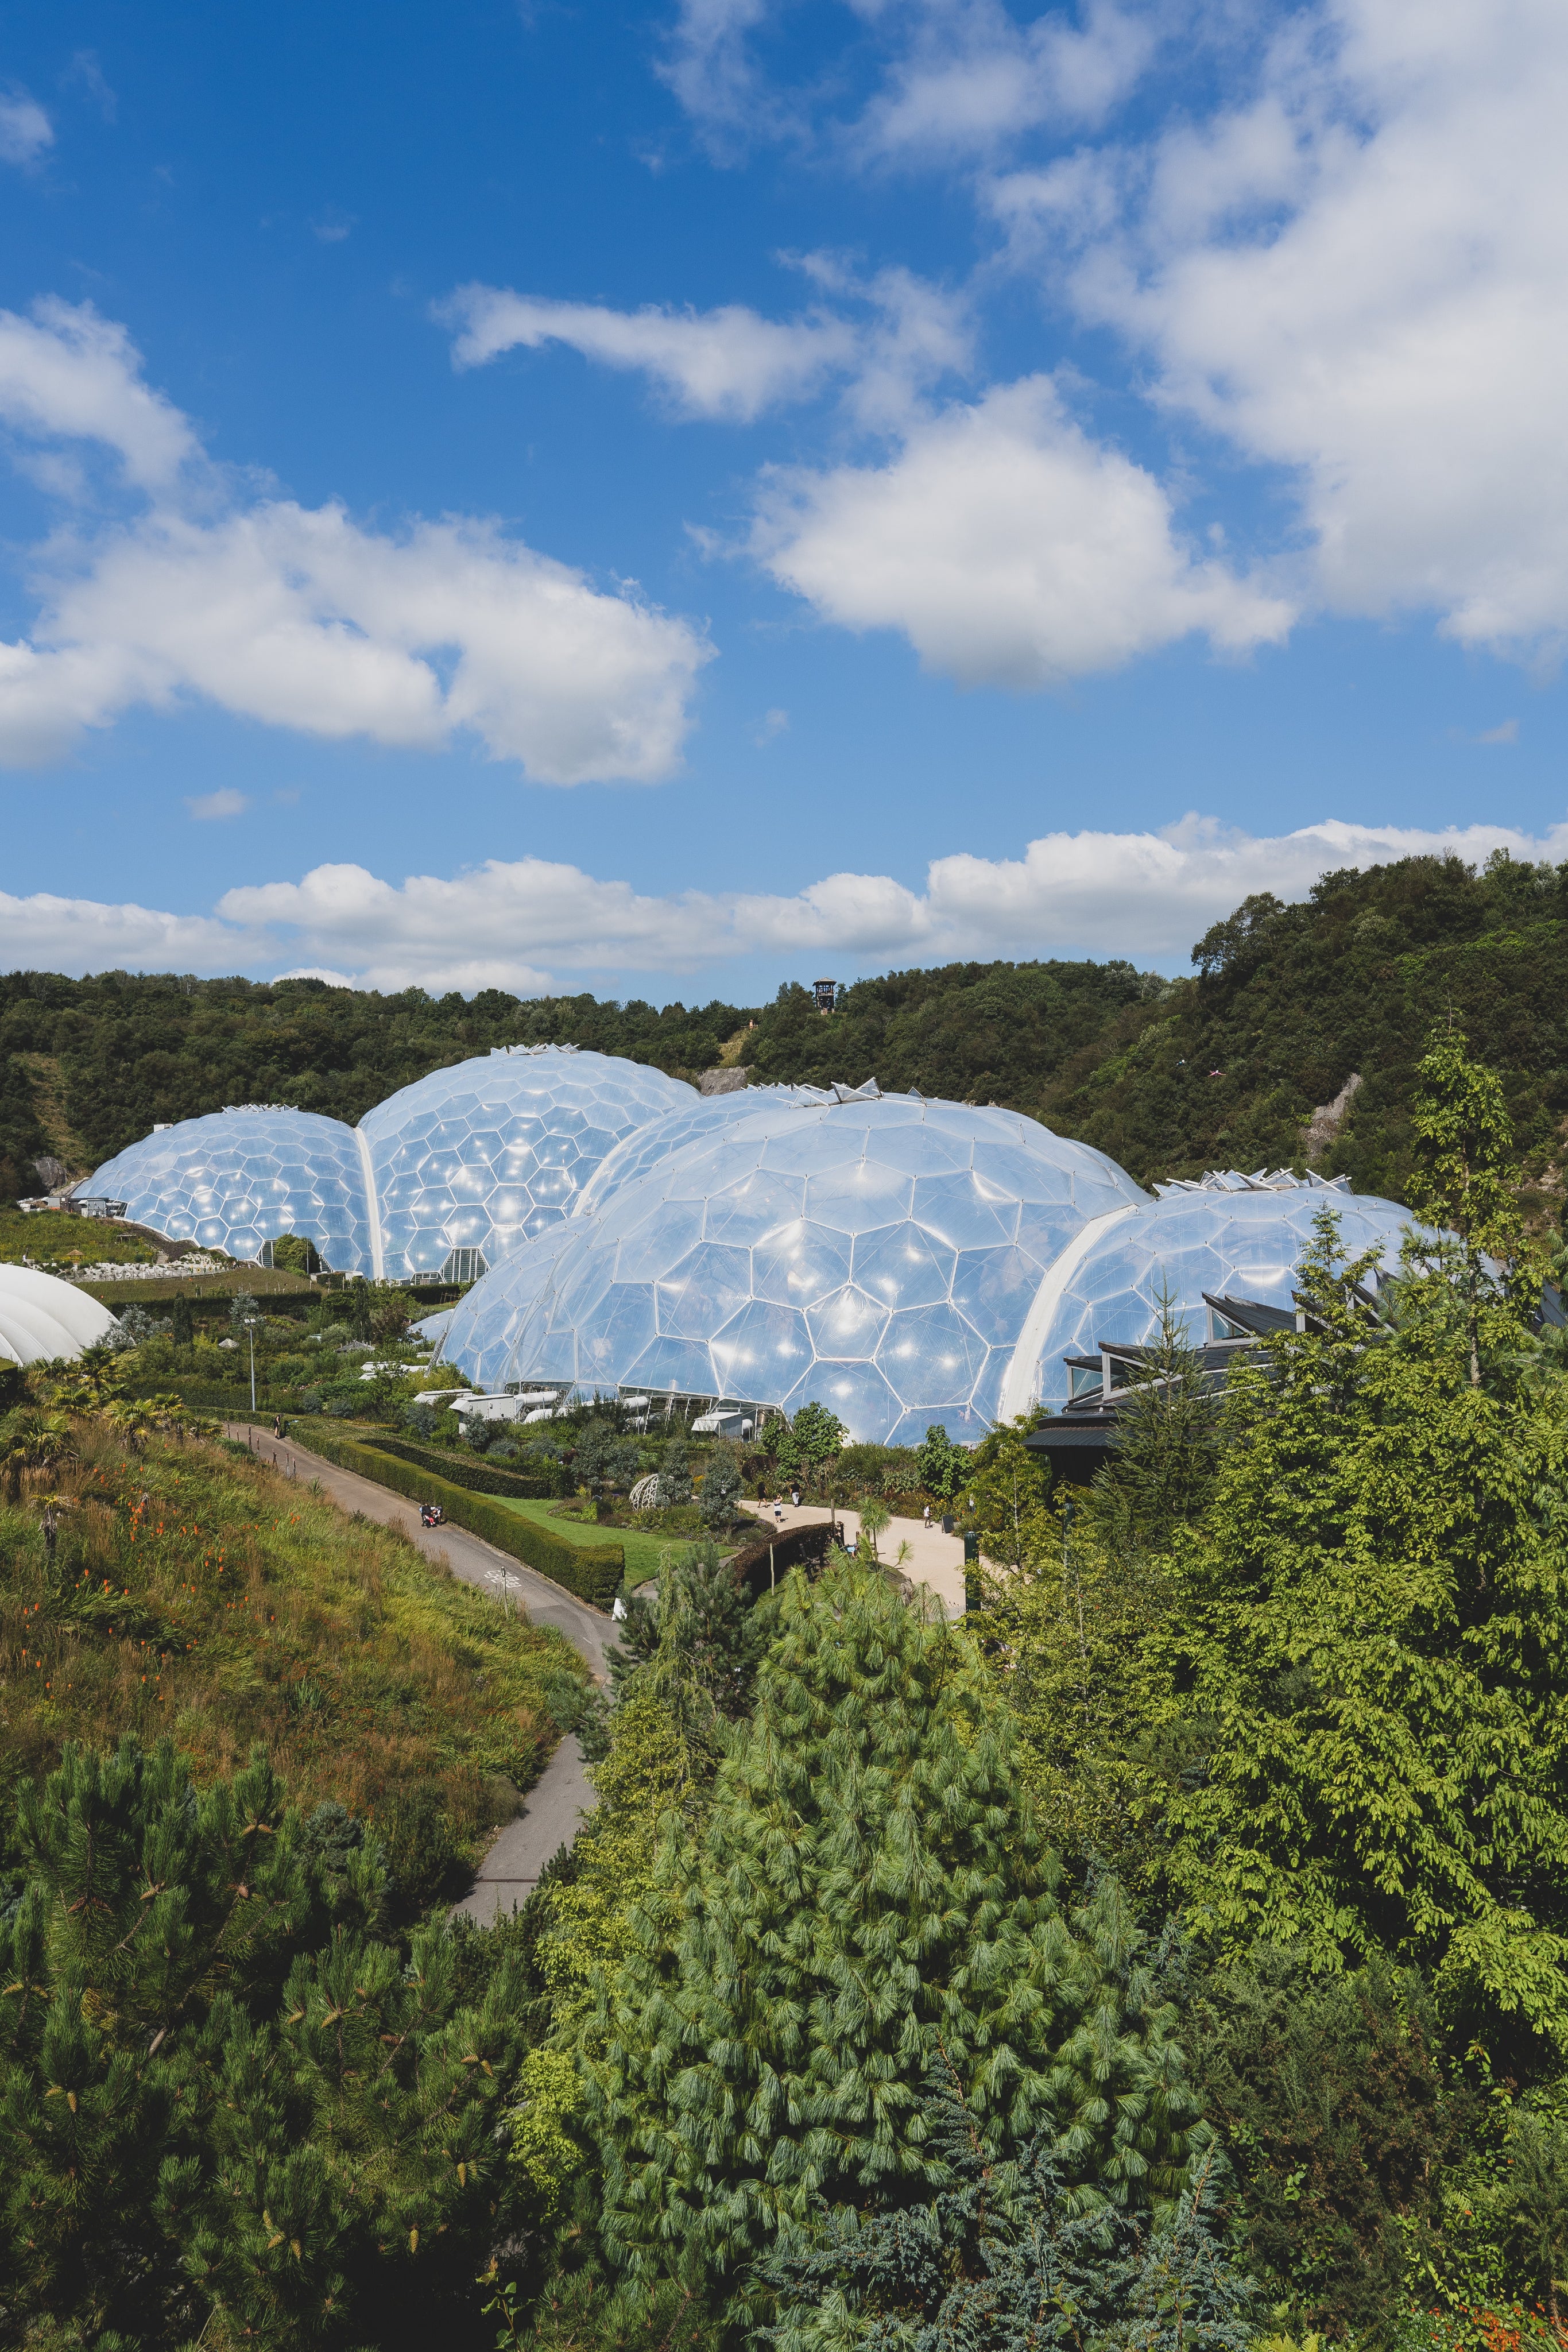 Biome conservatories with geodesic domes amid lush green landscape under a blue sky with scattered clouds.